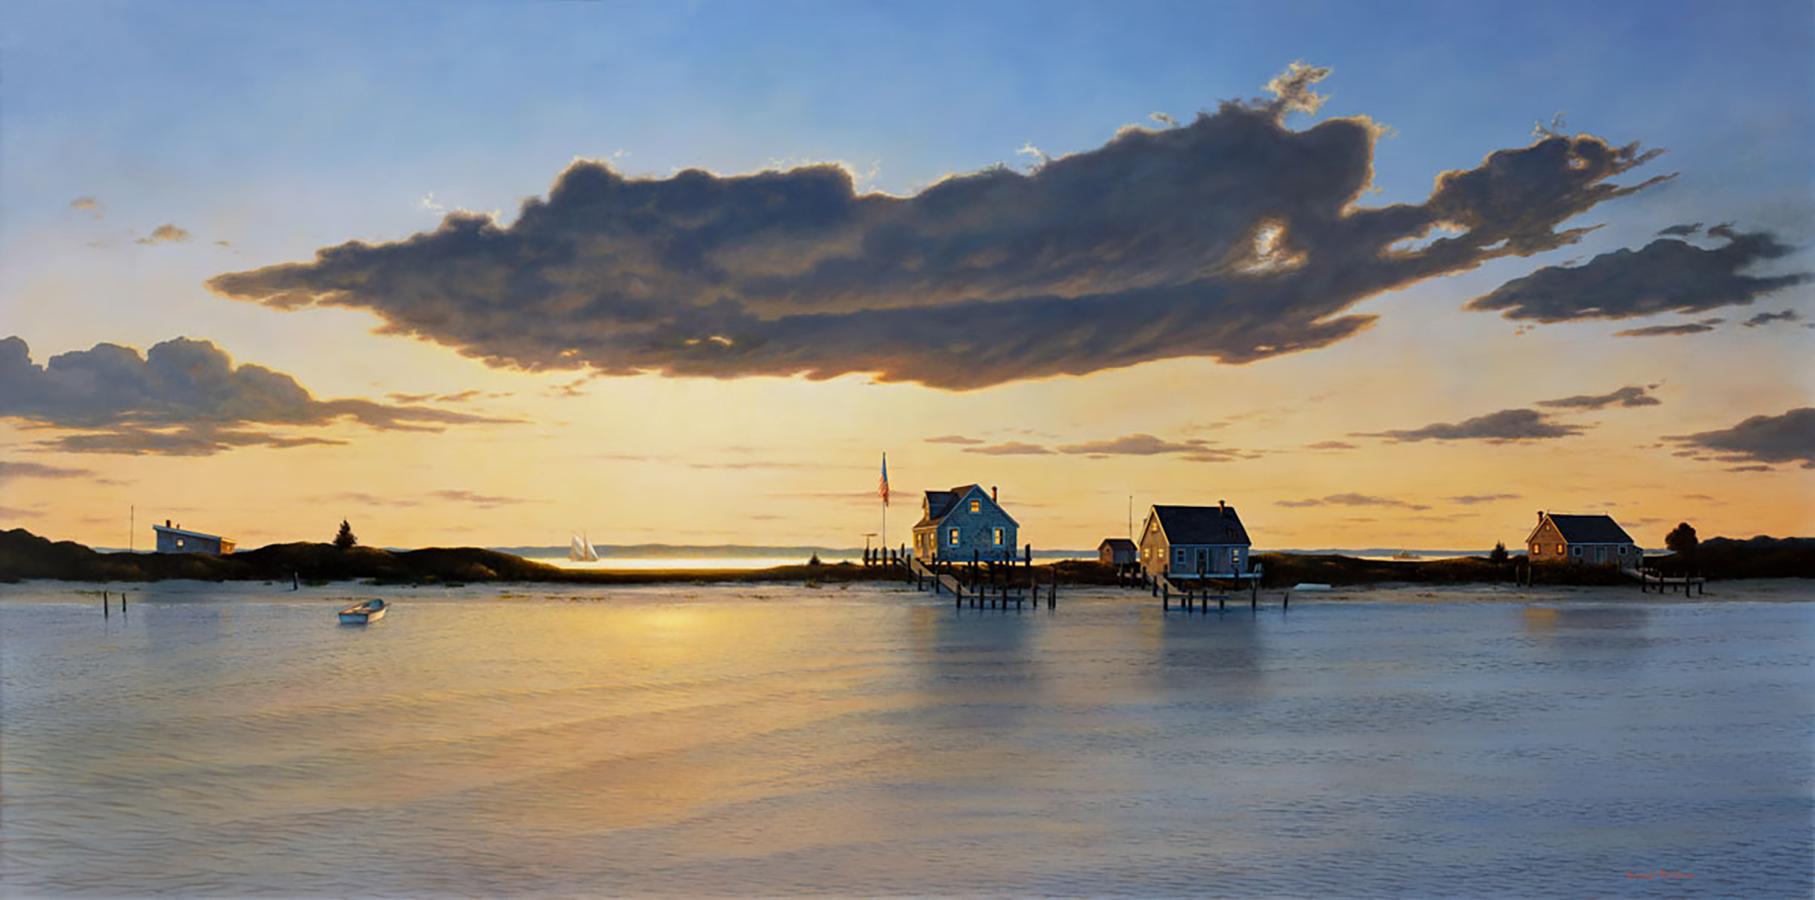 This coastal seascape by contemporary realist Daniel Pollera captures a line of coastal homes at sunset. Along the horizon, four houses are visible with docks, while an orange sky with dramatic clouds cast a warm glow over the water beneath it.